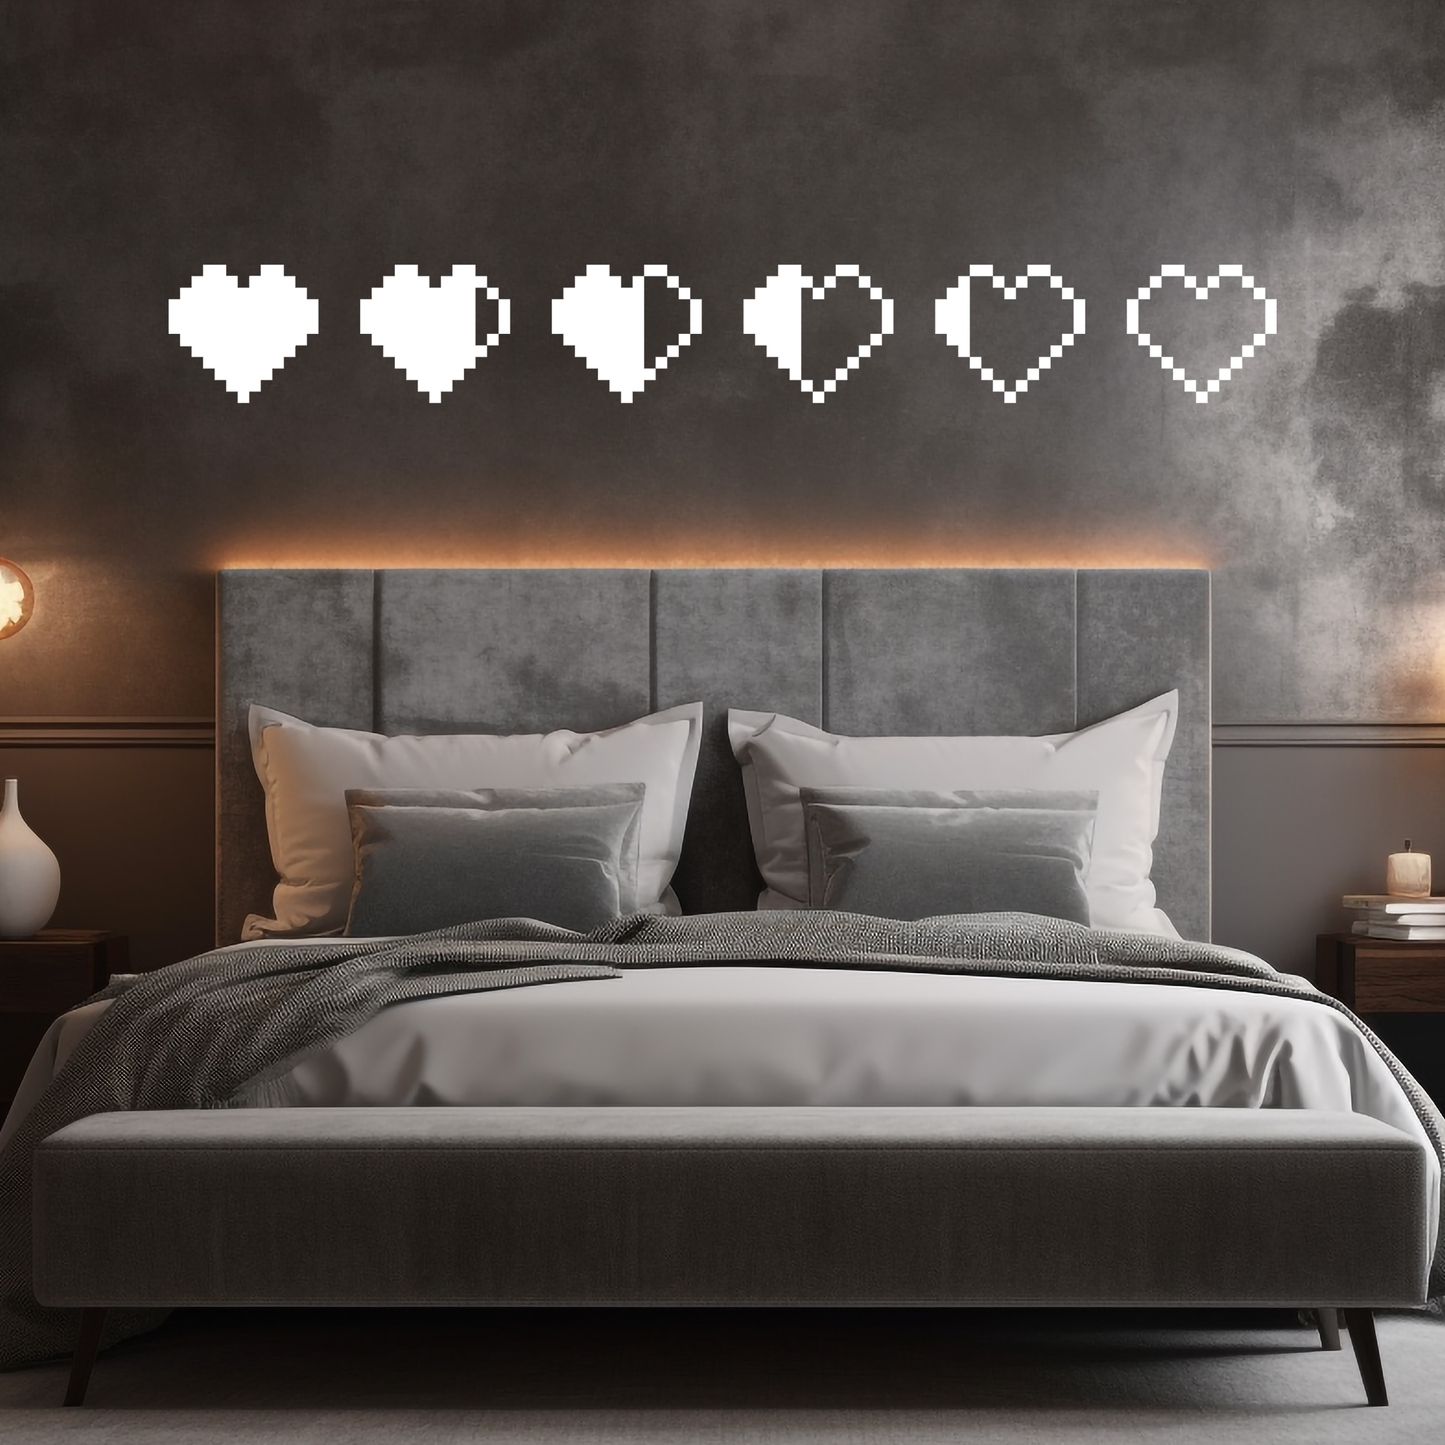 Gaming Hearts Wall Sticker Decal